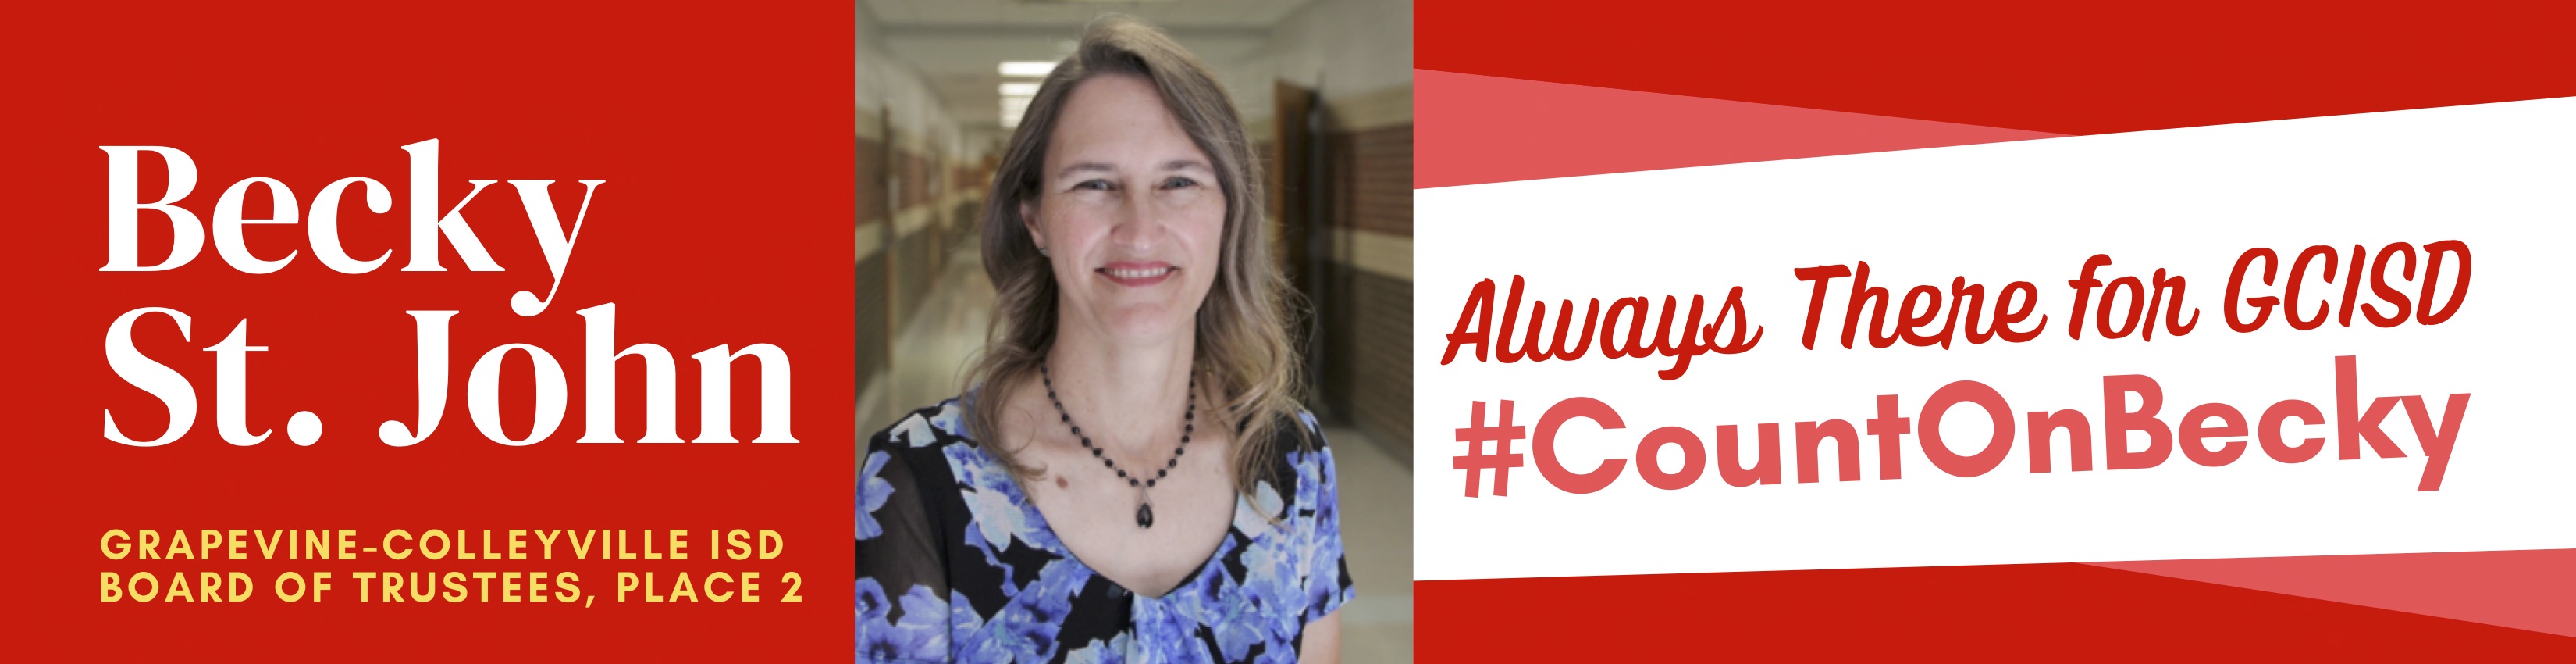 Becky St. John, Grapevine Colleyville ISD Board of Trustees, Place 2